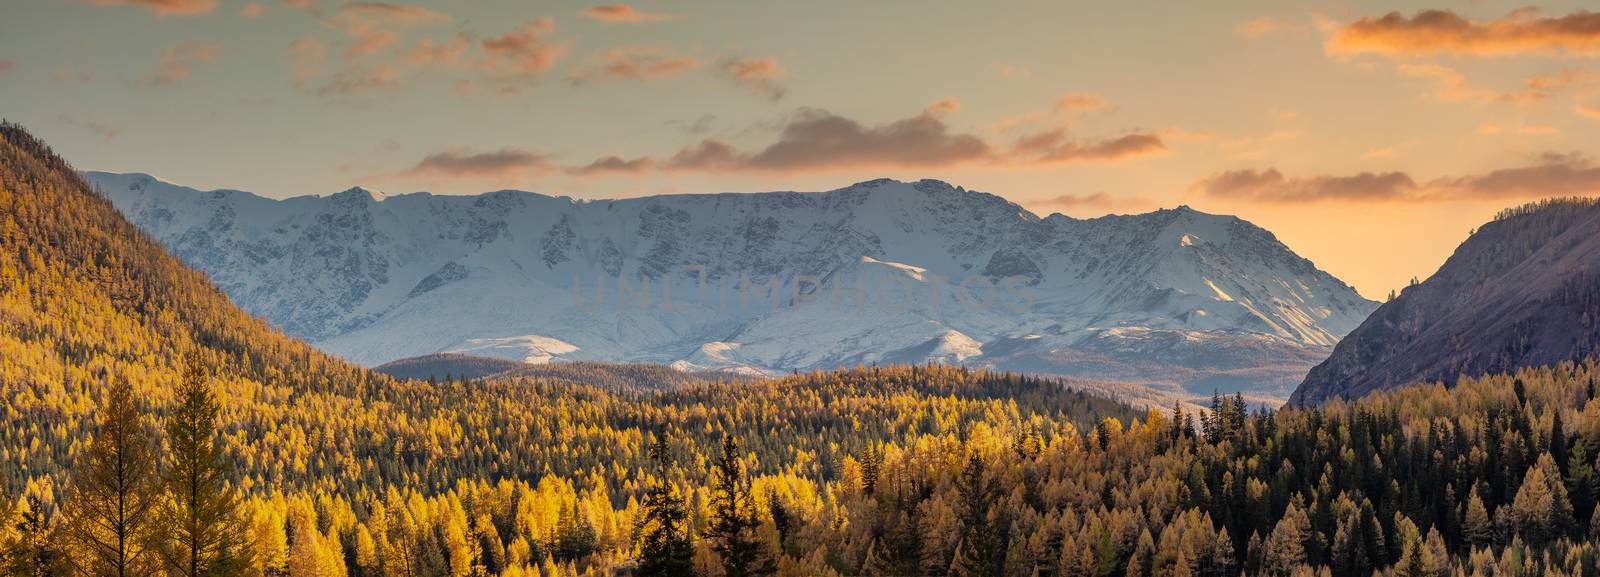 Scenic panoramic aerial view of snowy mountain peaks of North Chuyskiy ridge. Golden trees in the foreground. Beautiful cloudy sunset sky as a backdrop. Golden hour. Altai mountains, Siberia, Russia.